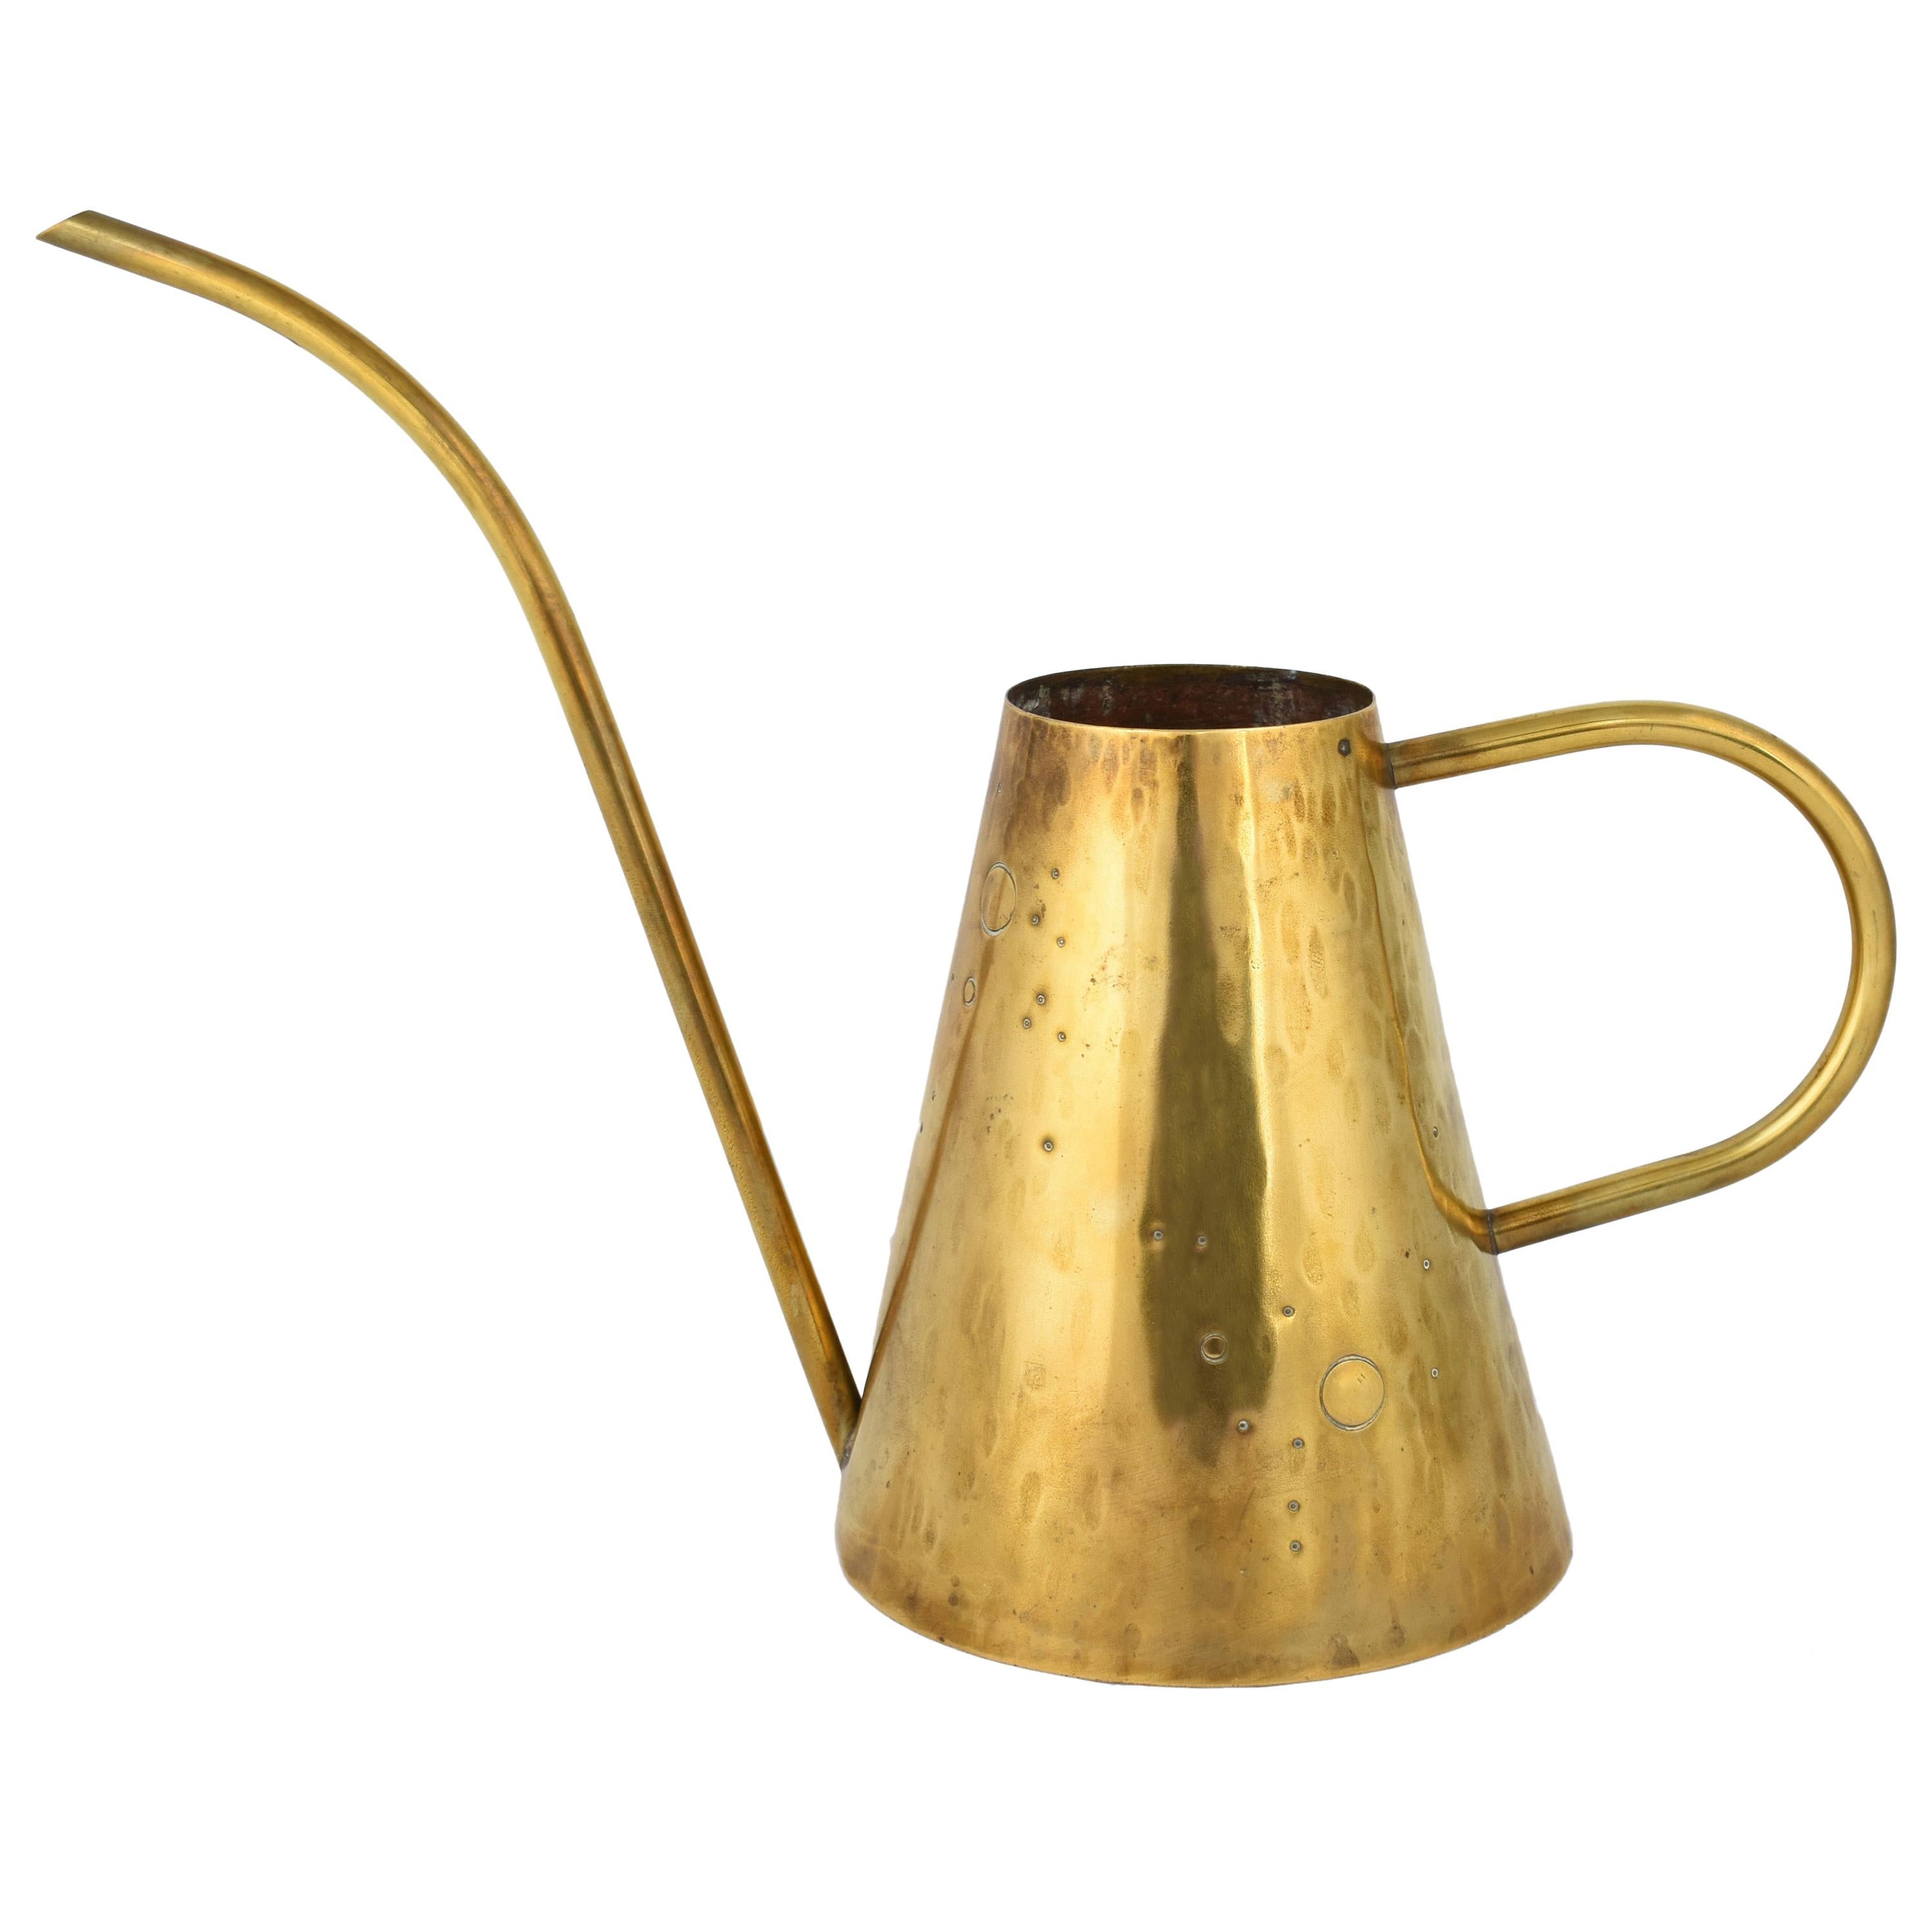 Vintage Brass Watering Can, Germany, 1950s